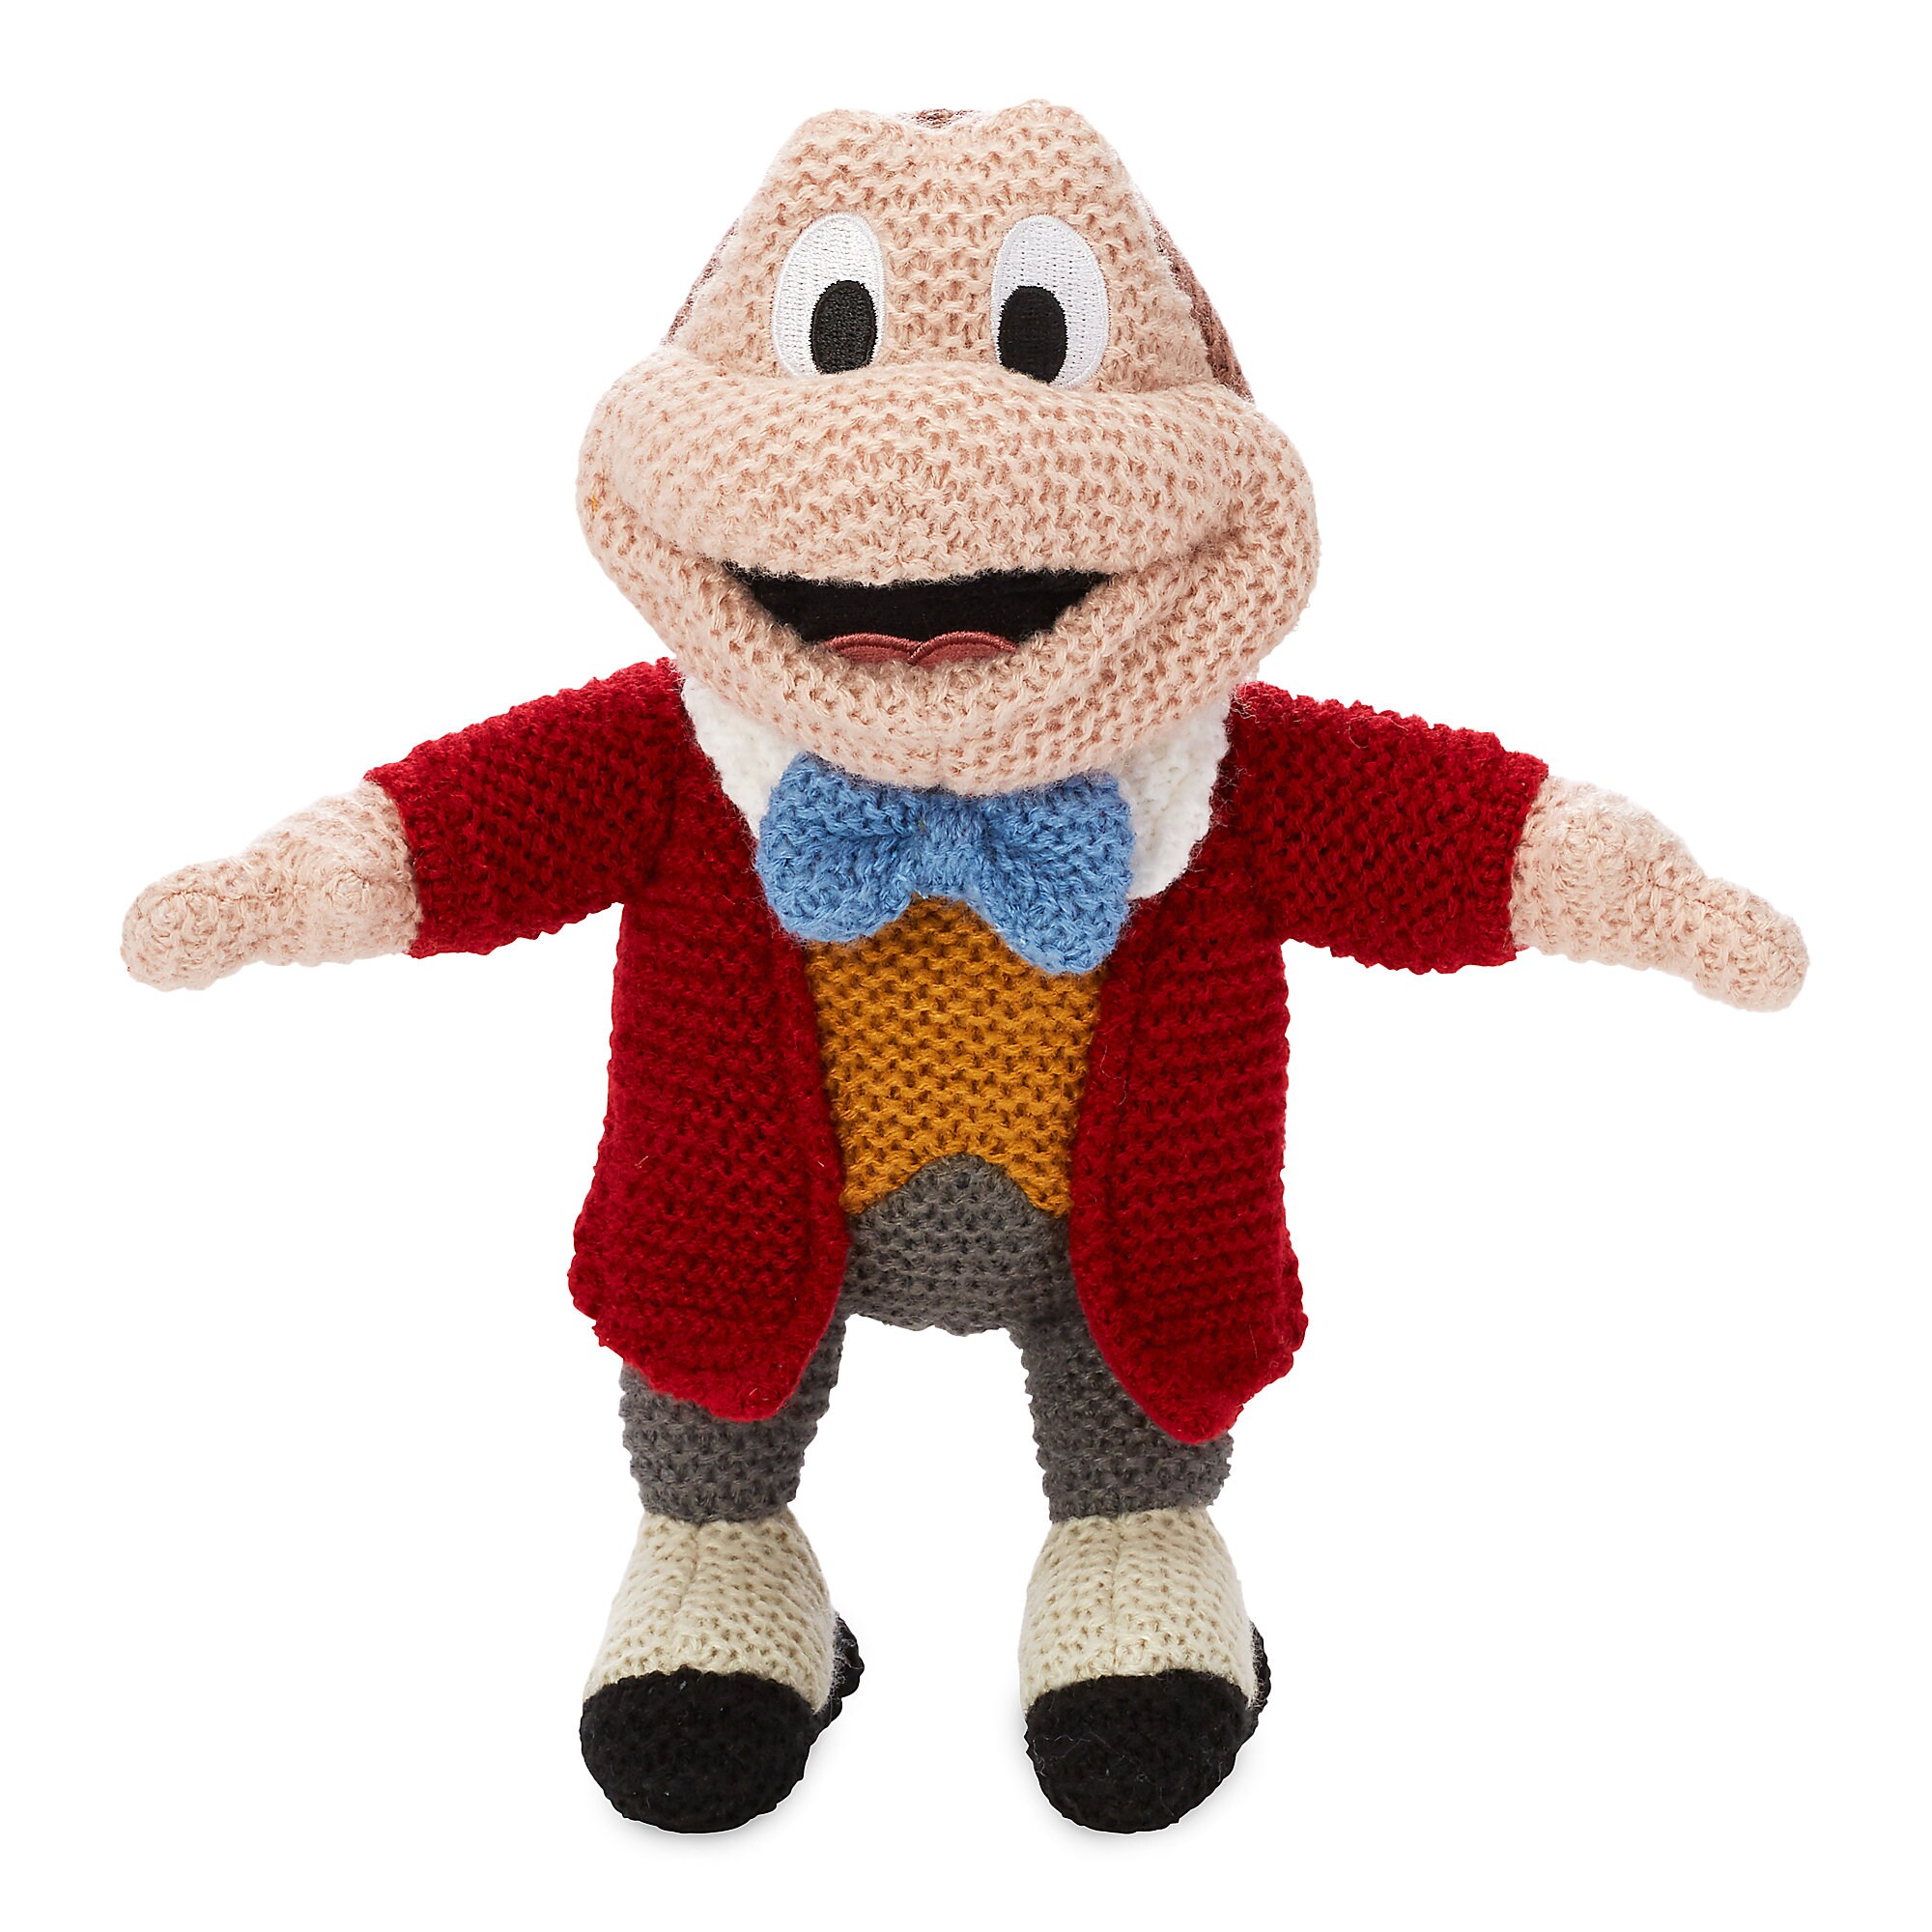 Mr. Toad Knit Plush - 9'' - Limited Release